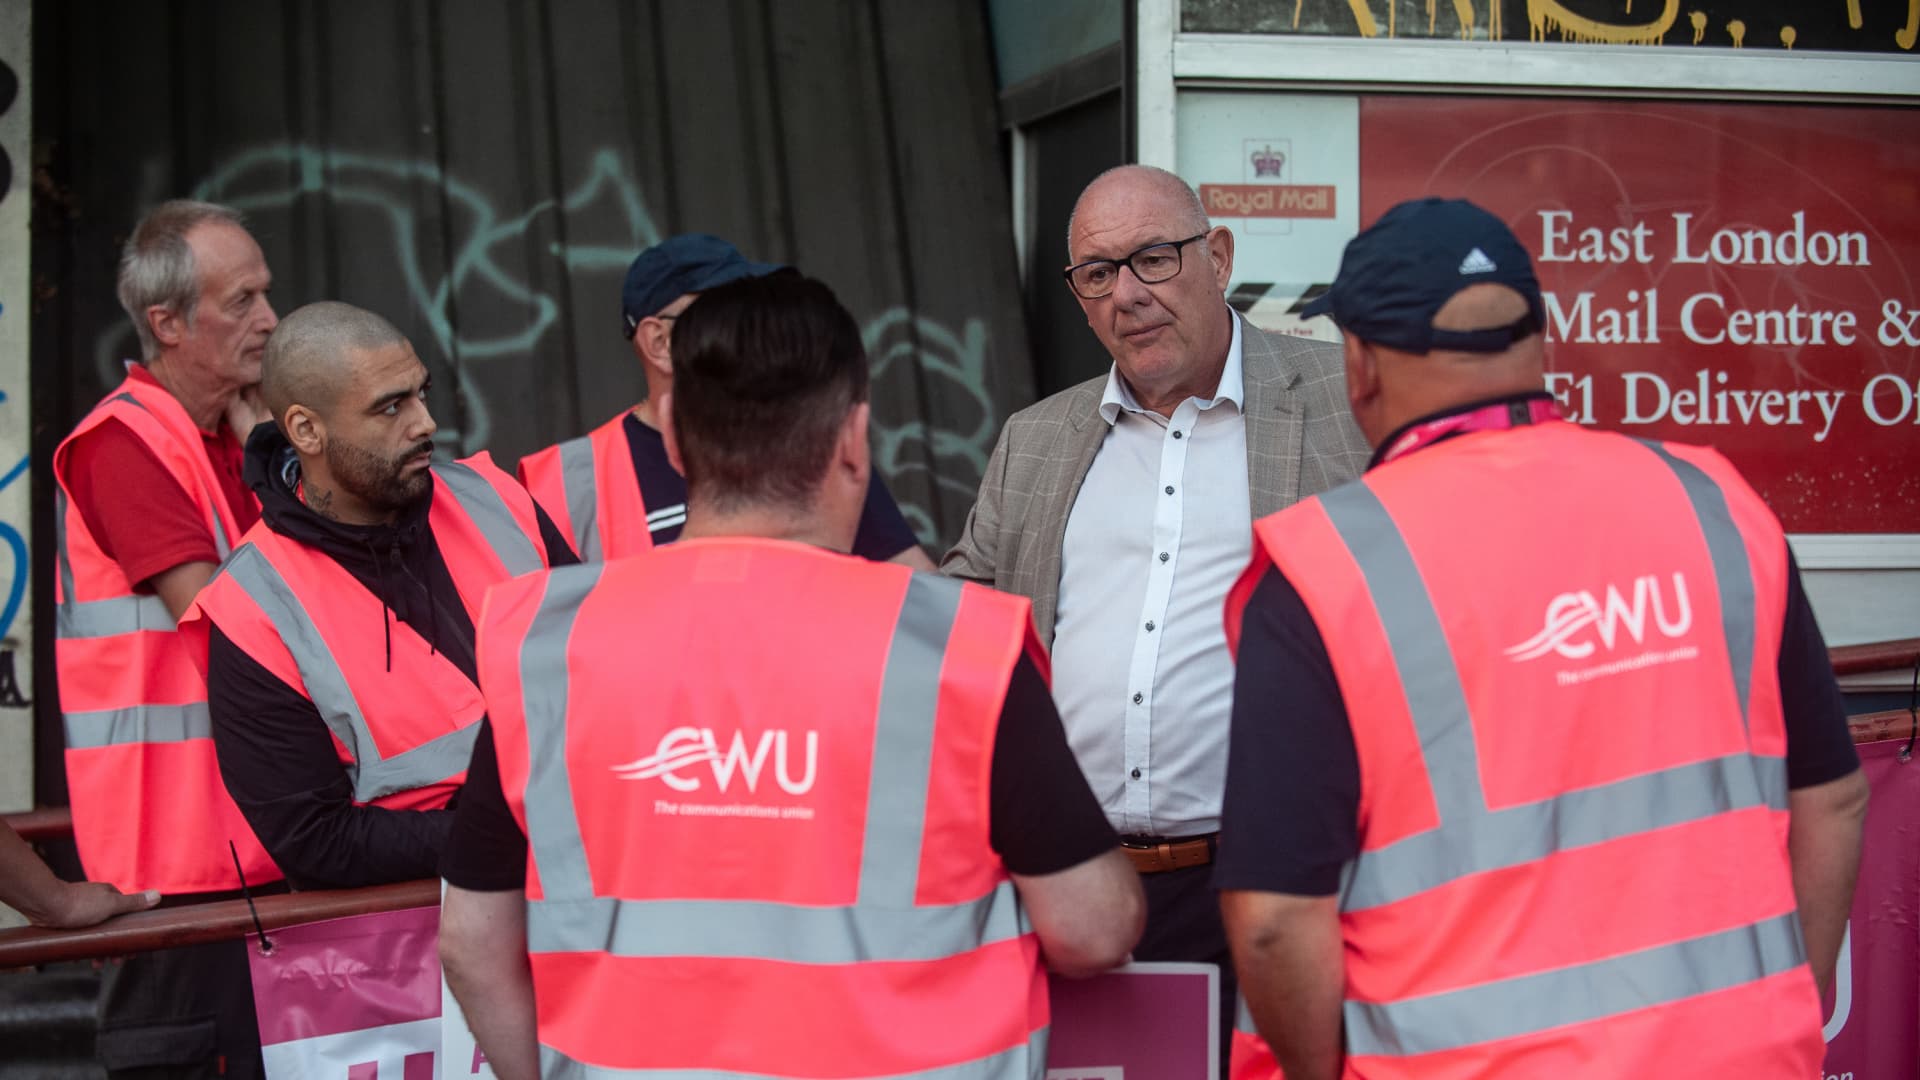 Postal workers in the UK, striking over pay and working conditions, agree crunch talks with Royal Mail bosses